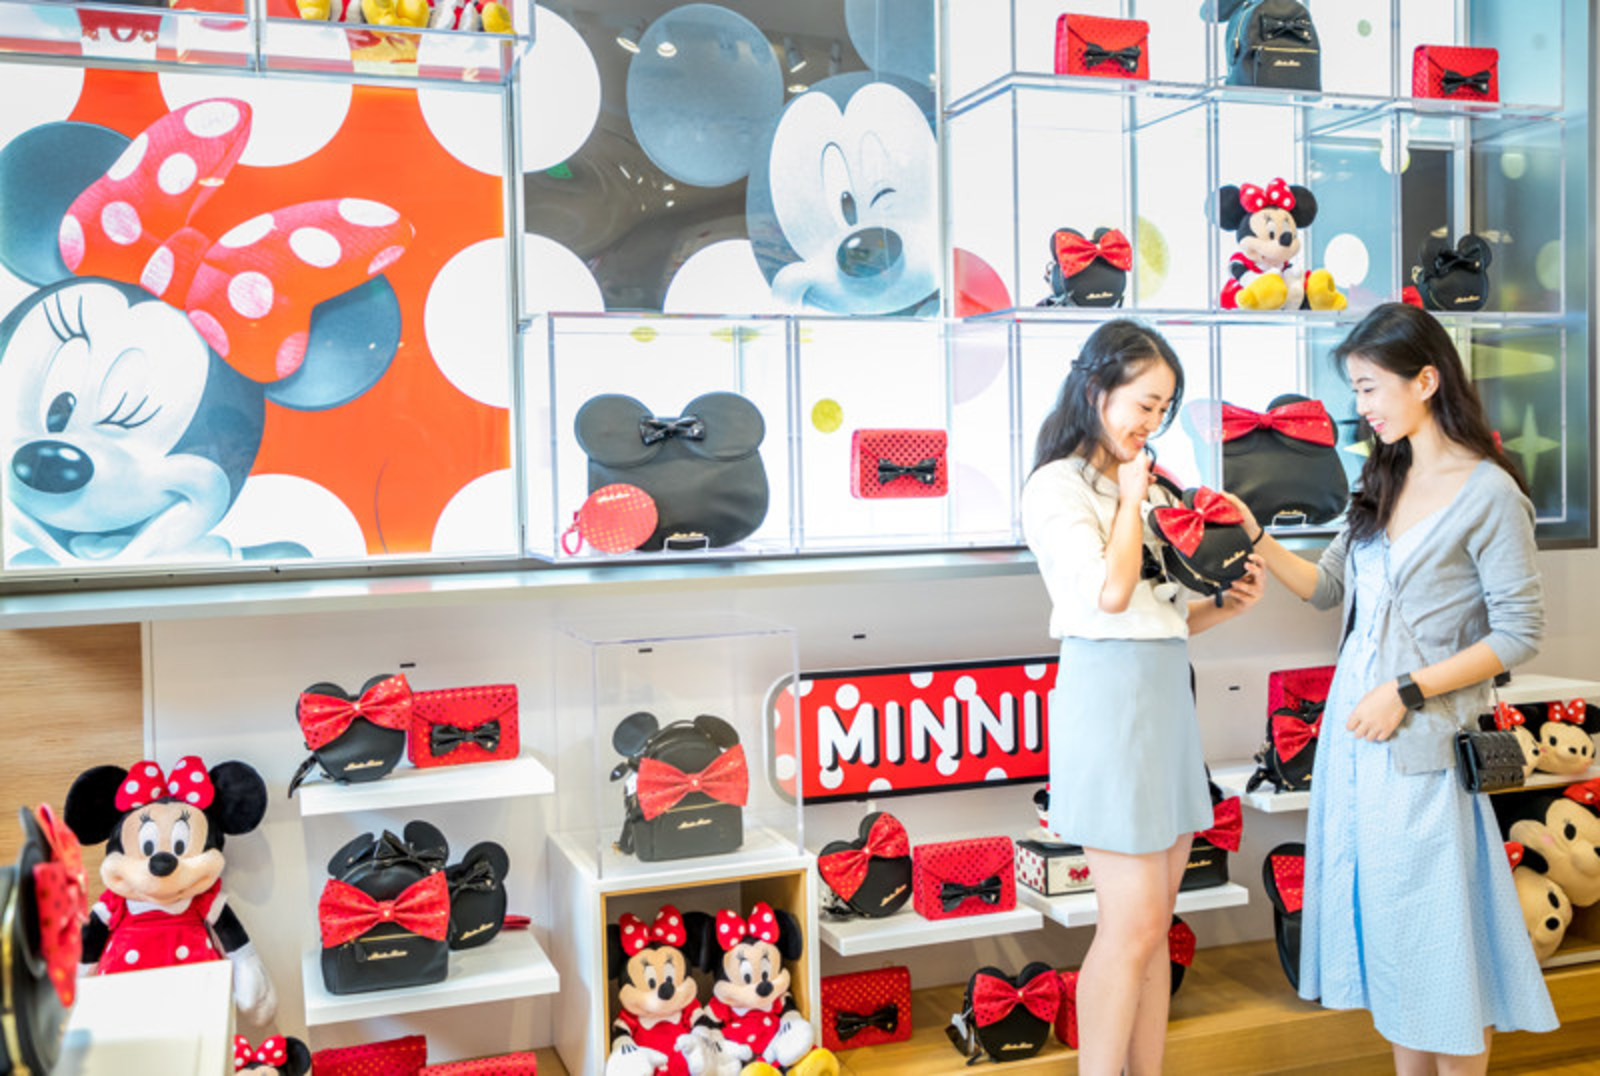 Disney Store Celebrates Grand Opening of Second Store in Shanghai